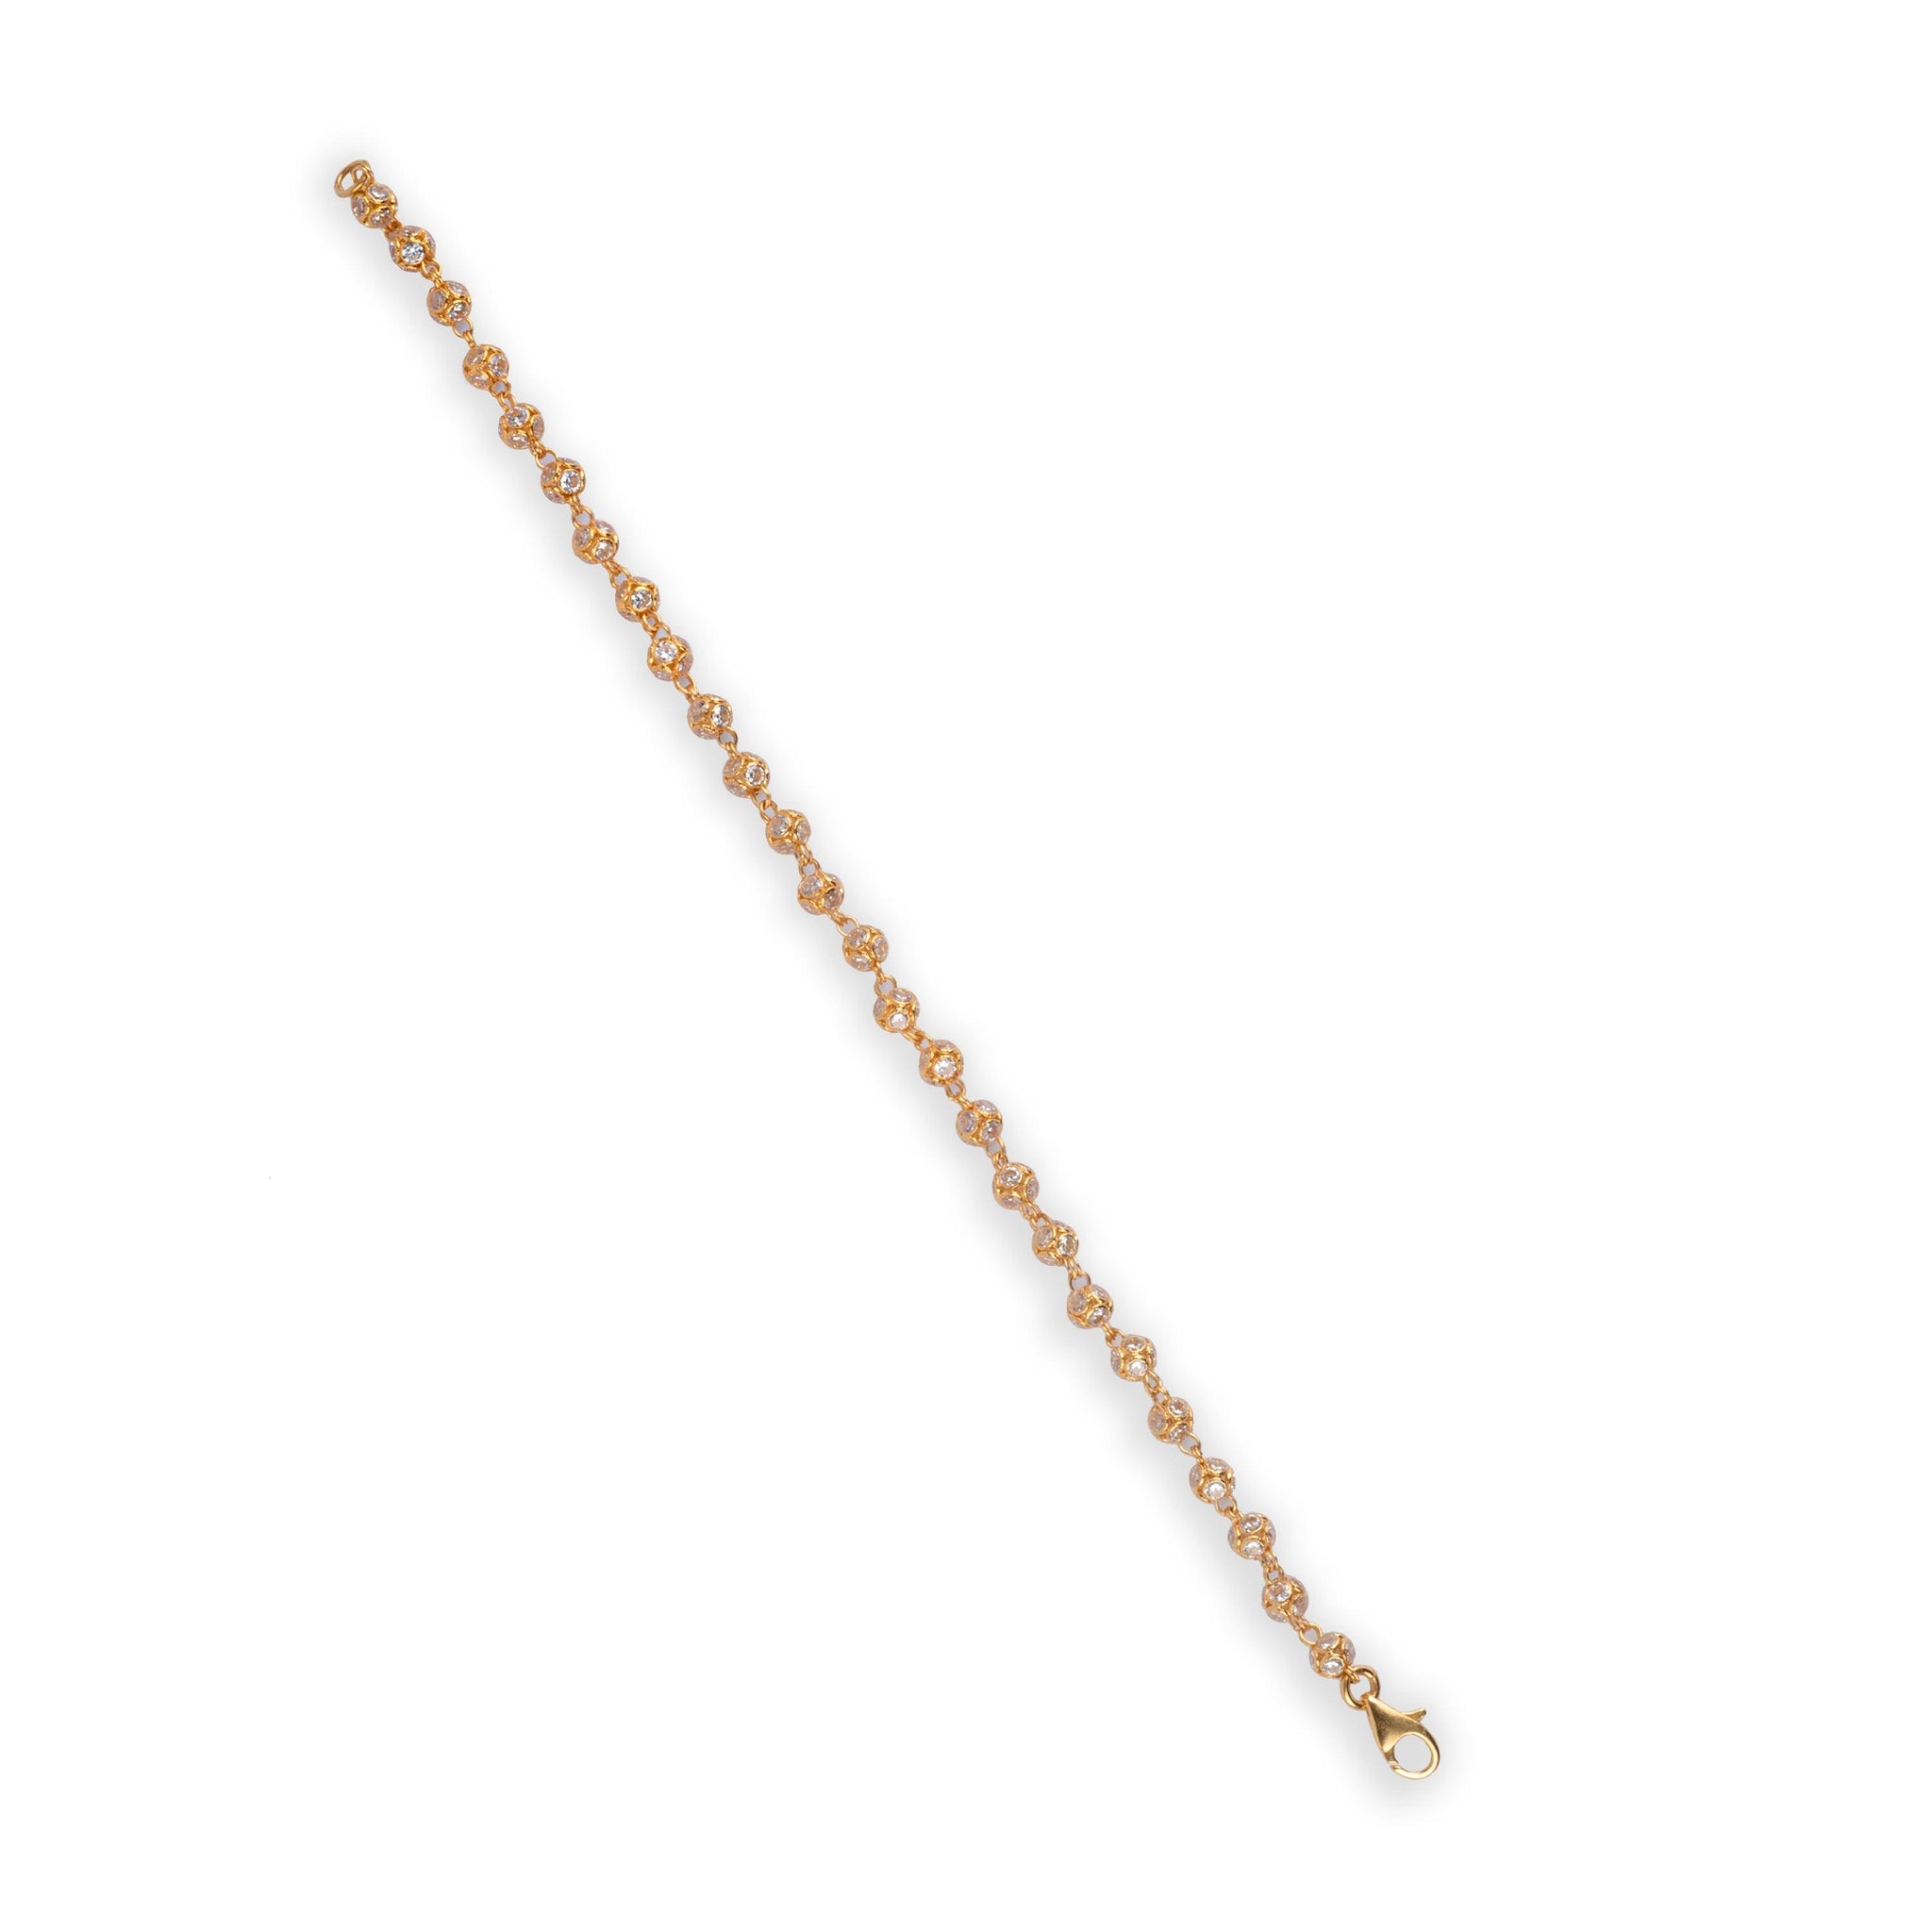 22ct Gold Beaded Bracelet with Cubic Zirconia Stones with Lobster Clasp (6.5g) LBR-7133